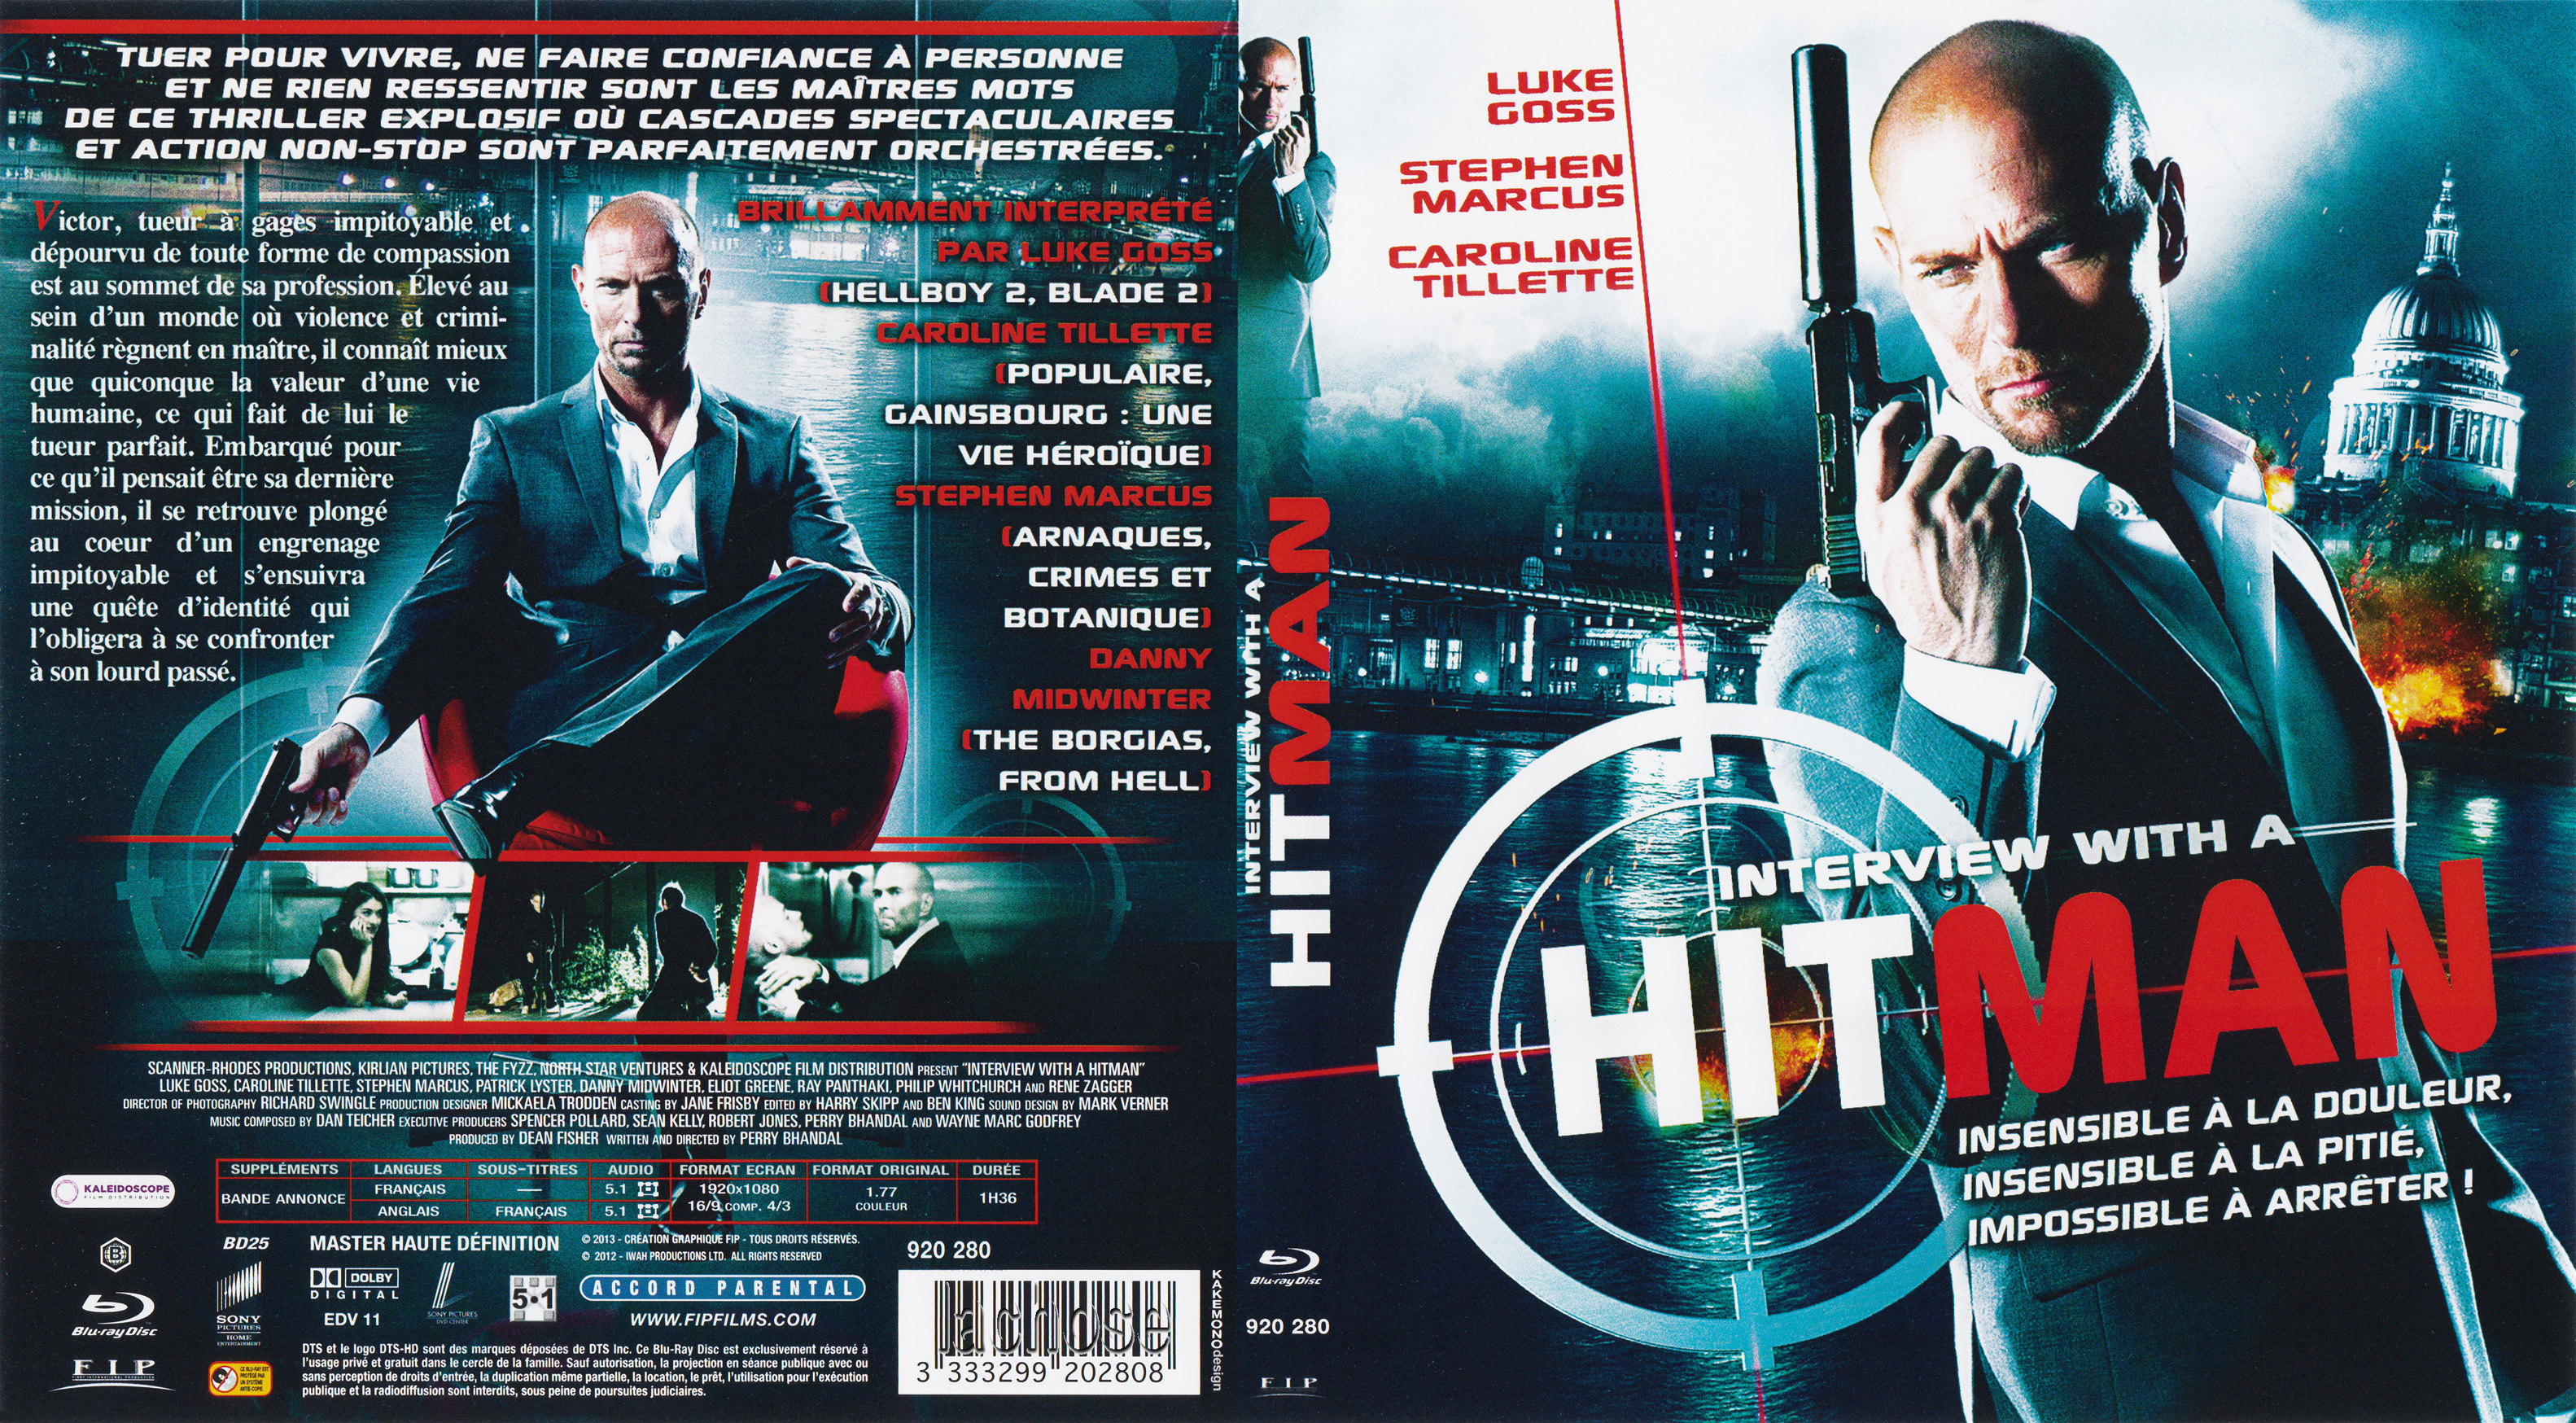 Jaquette DVD Interview with a hitman (BLU-RAY)